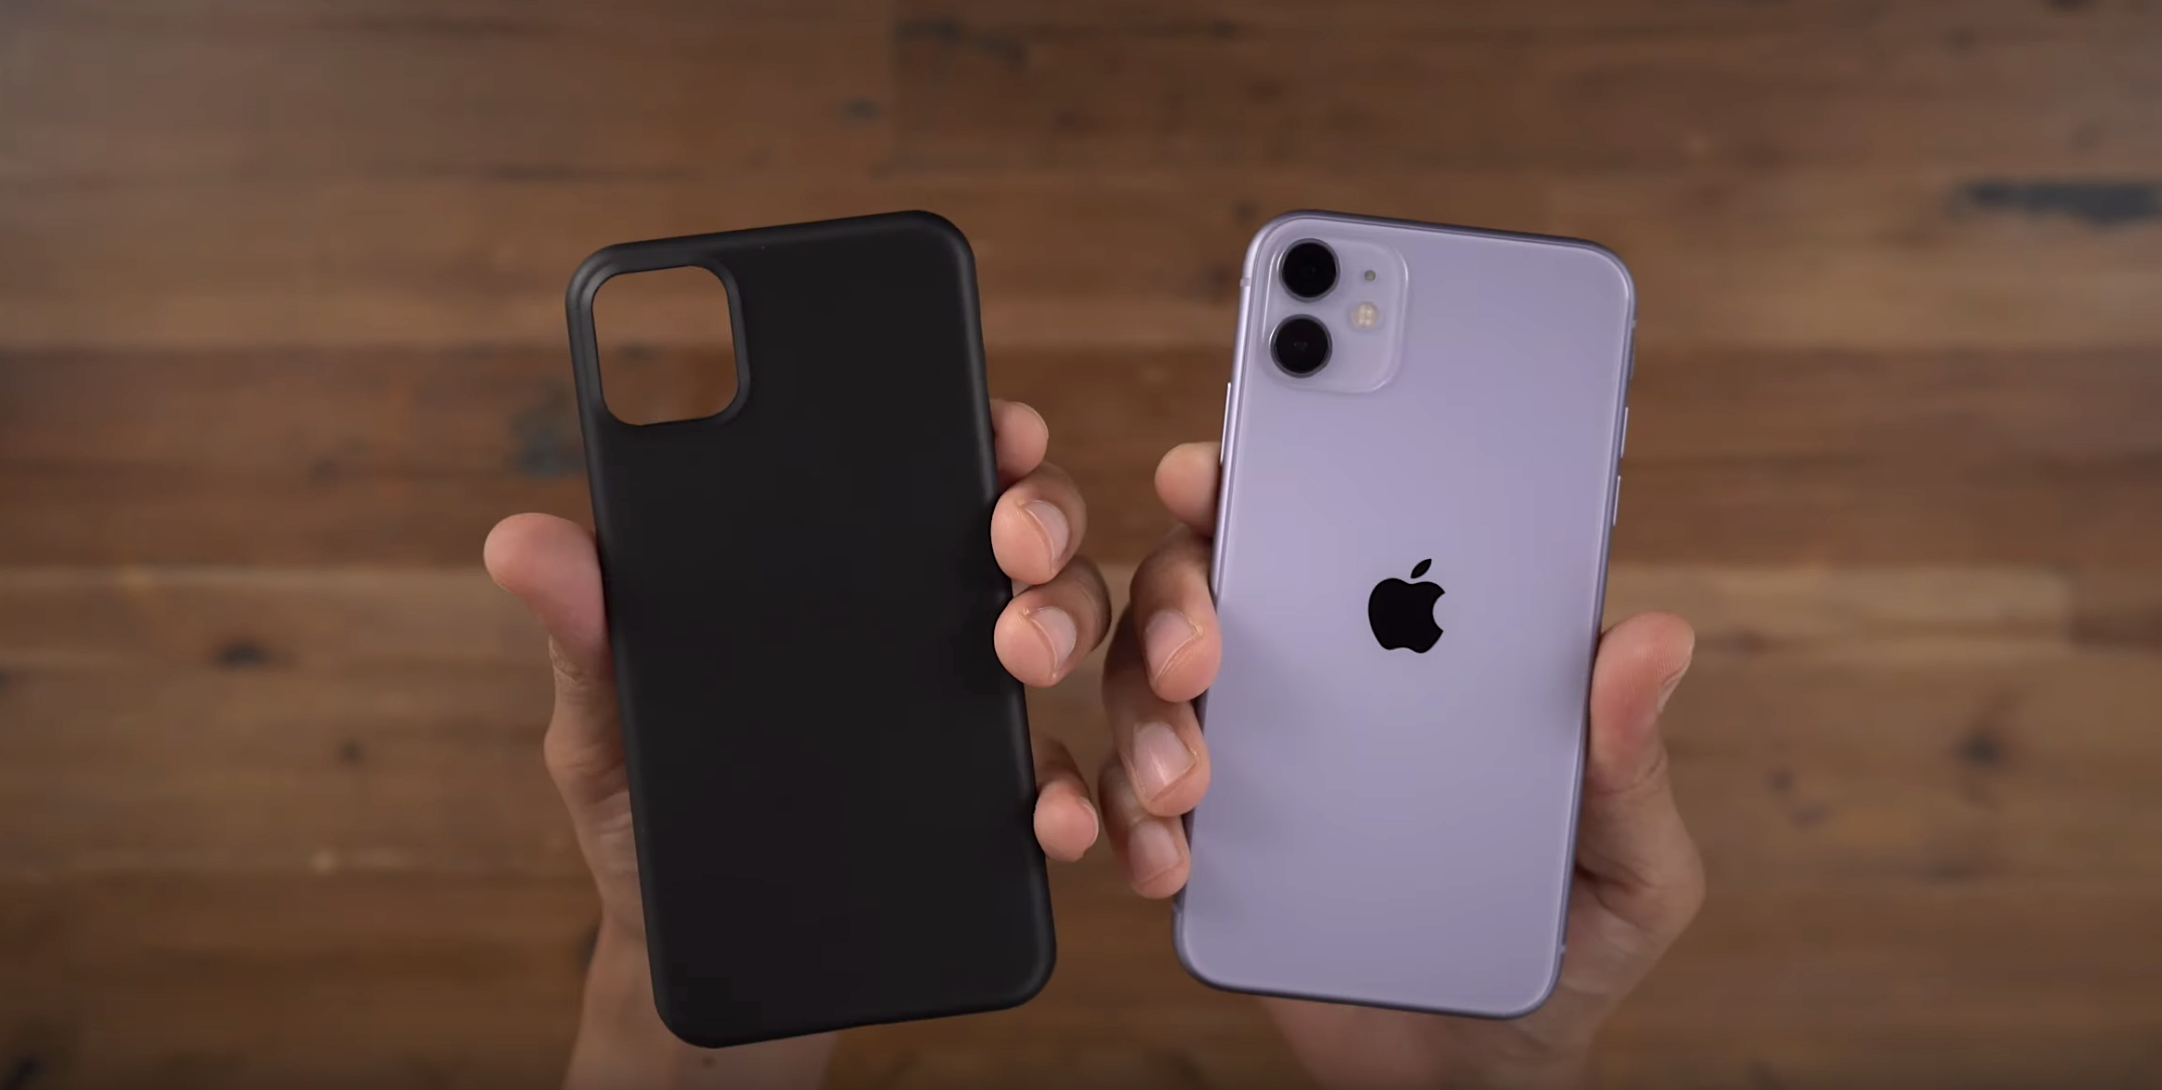 Iphone 11 Pro Case. Iphone 11 Pro on hand. Iphone 14 Pro Max Case hand. Iphone 11 Pro and 11 Case.